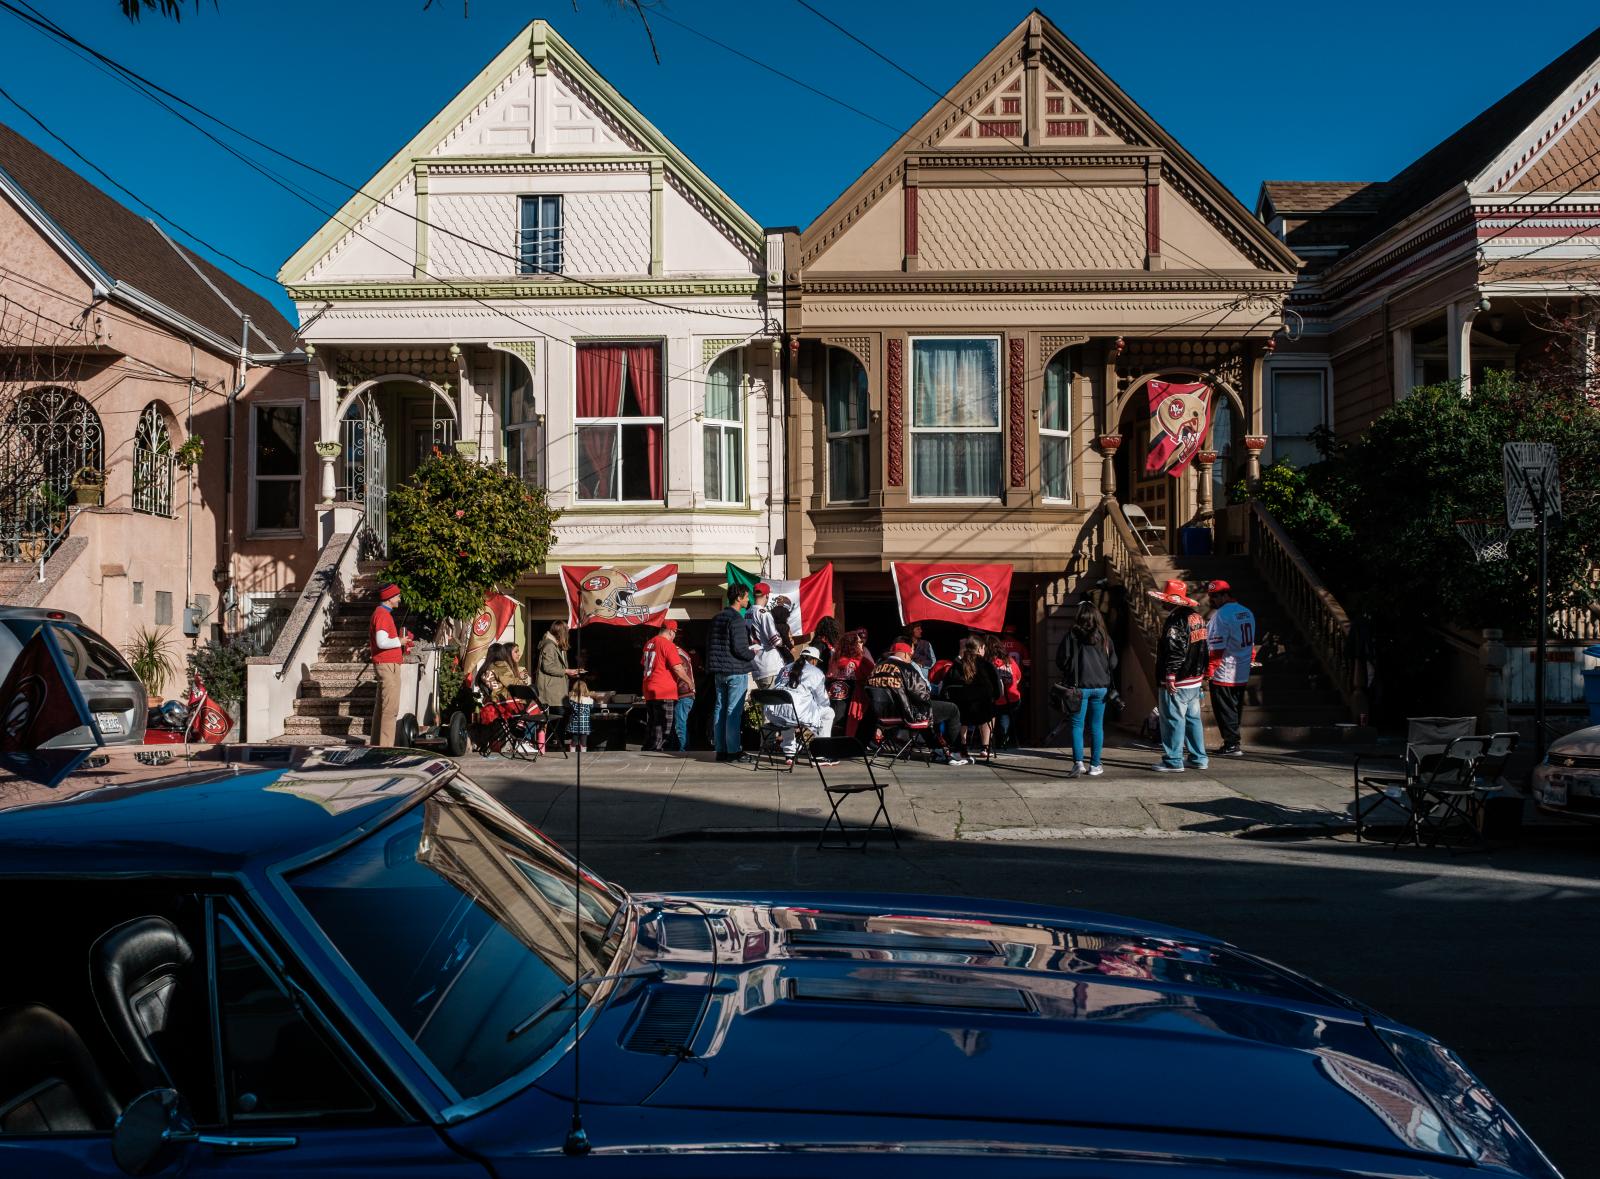 Image from A Scarlet and Gold Neighborhood